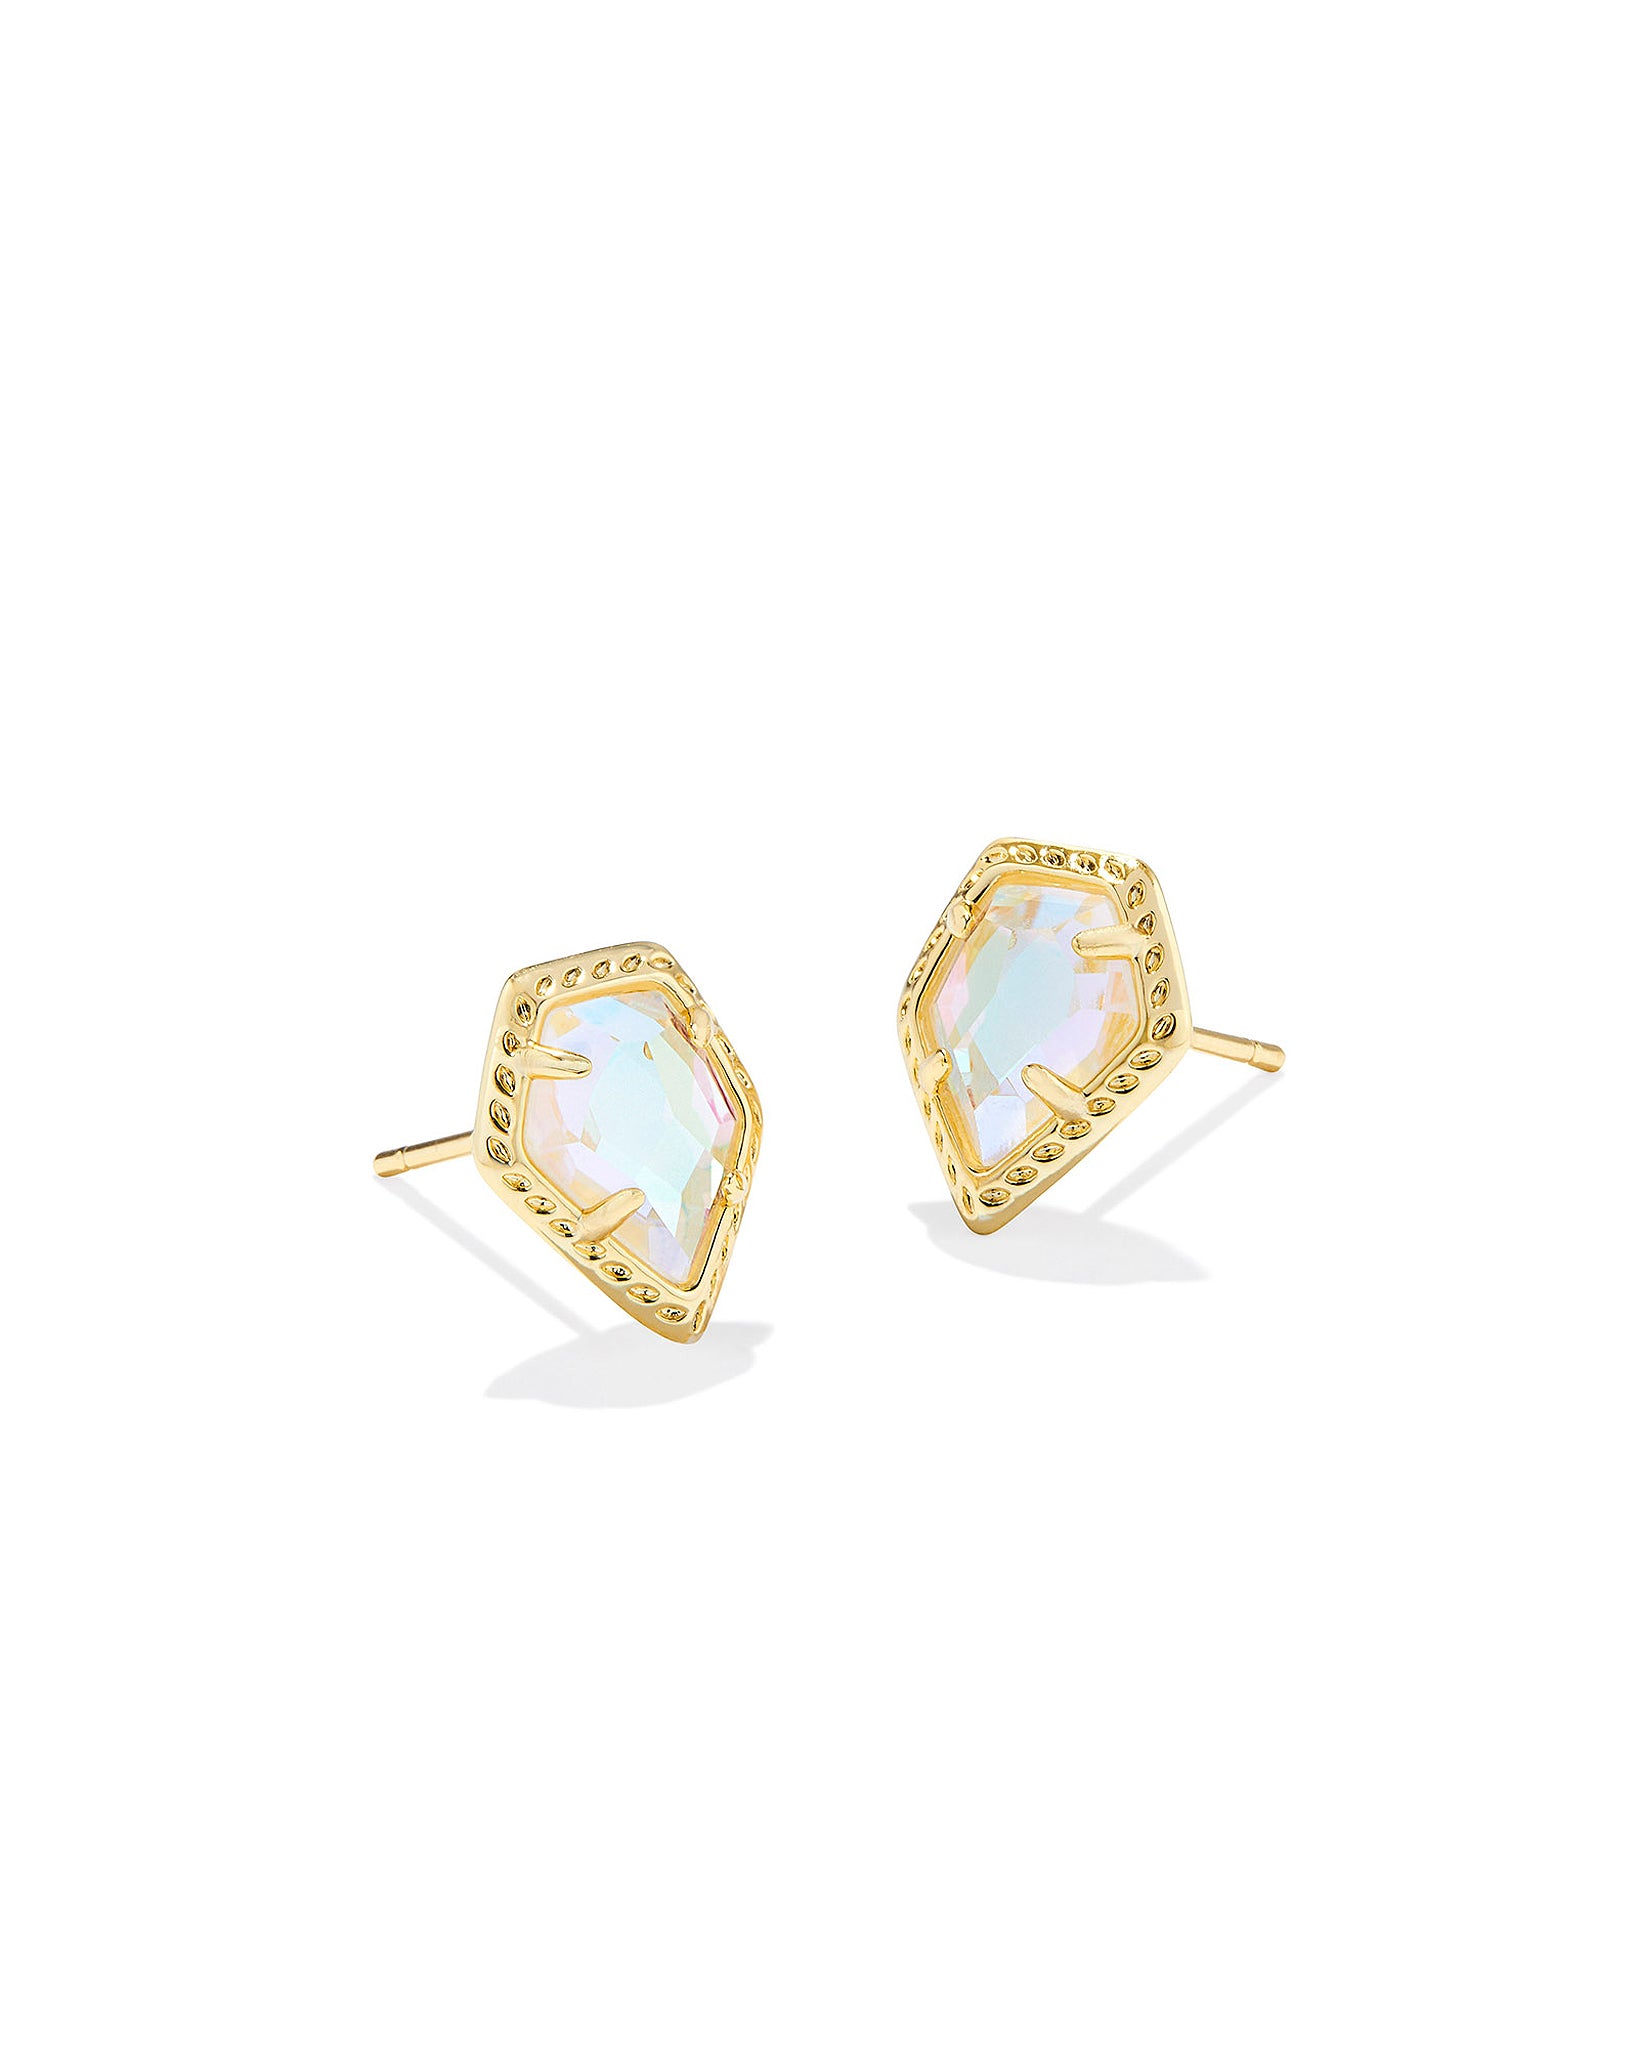 Kendra Scott Tessa Framed Stud Earrings in Dichroic Glass and Gold Plated